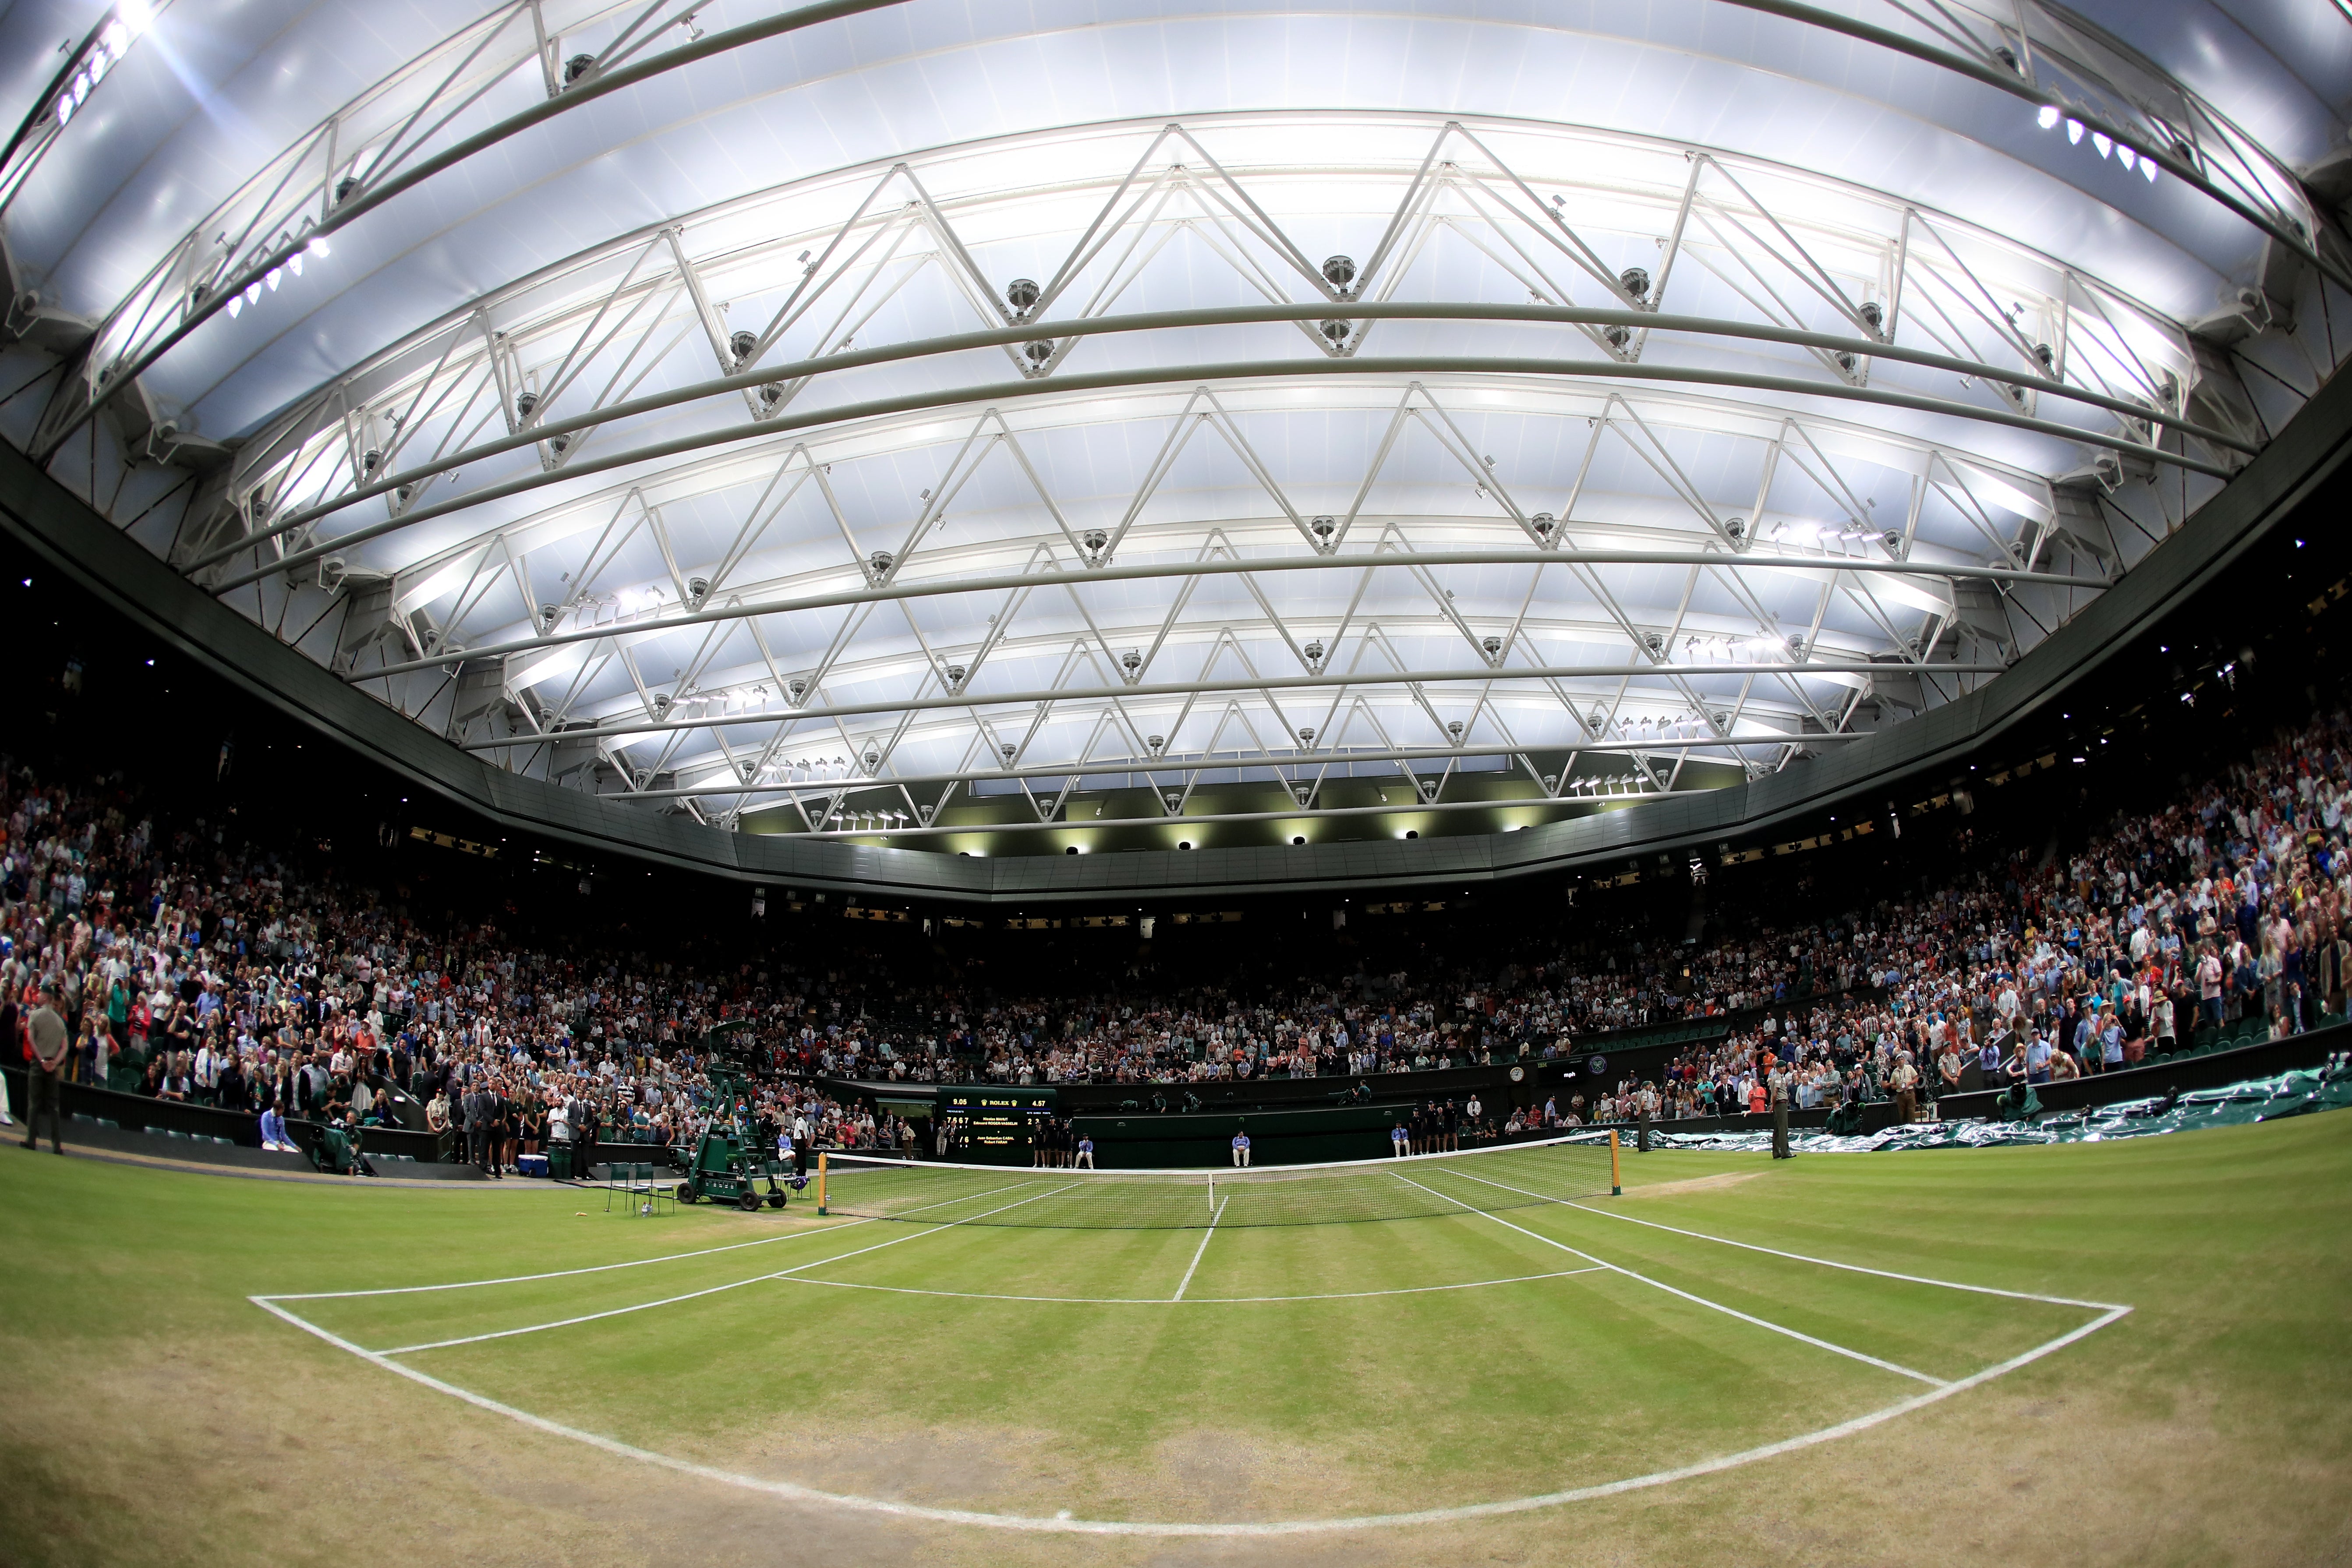 Wimbledon 2021: Will fans be able to attend?